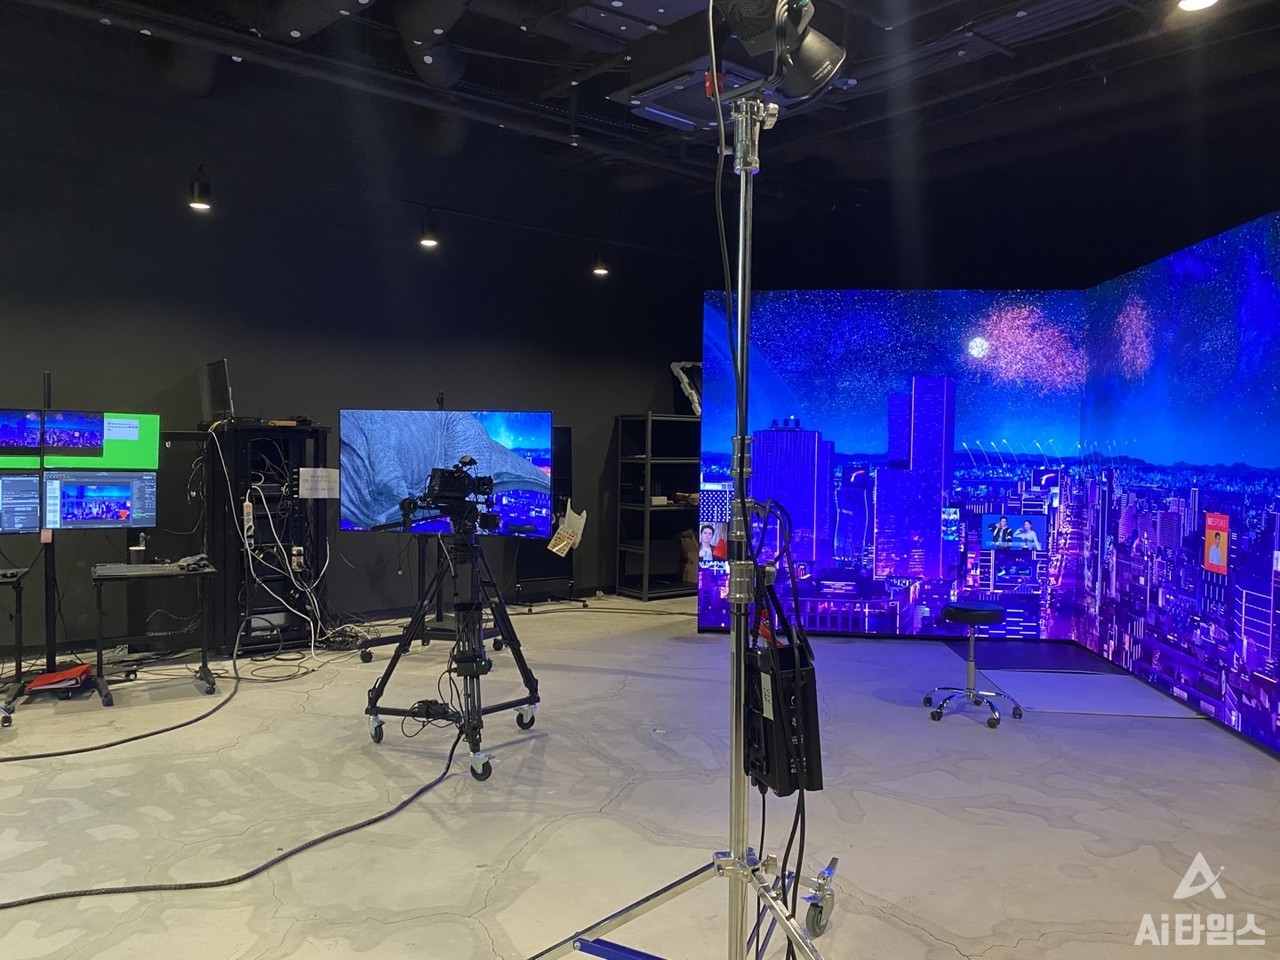 LED wall and filming equipment in Viv Lab 